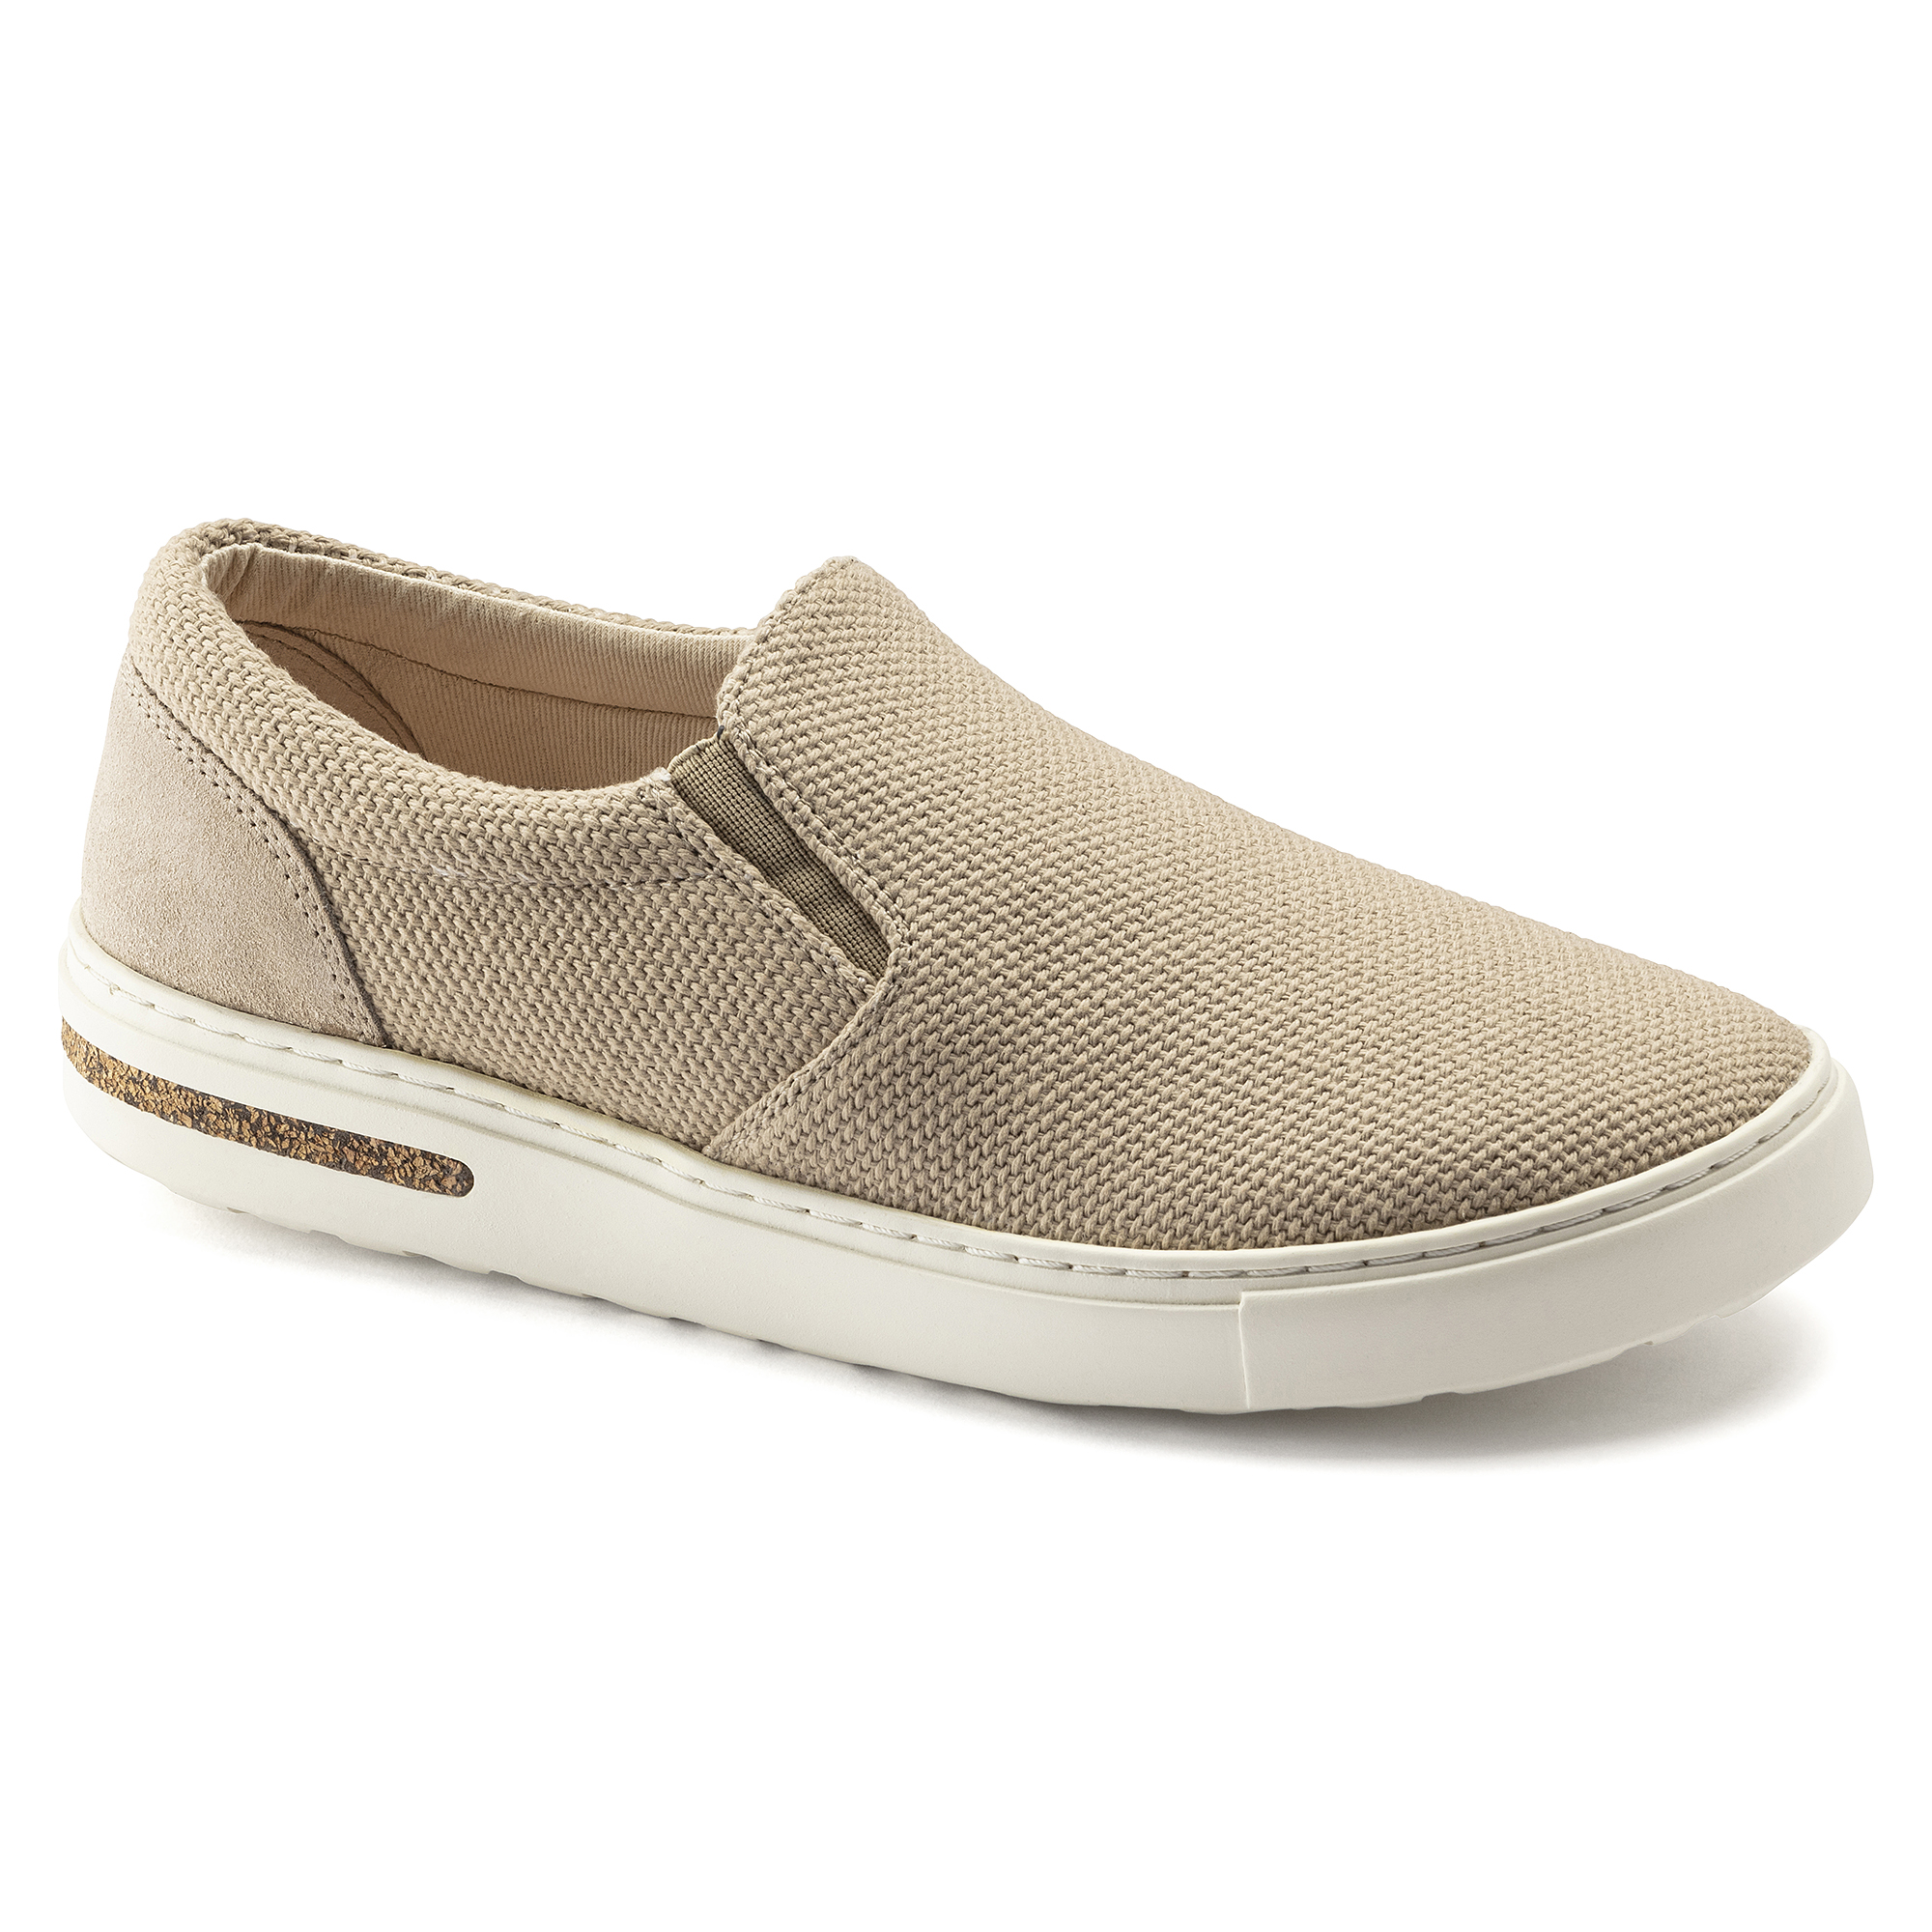 The Original Slip On Sneaker in Sand | Women's Shoes | Rothy's